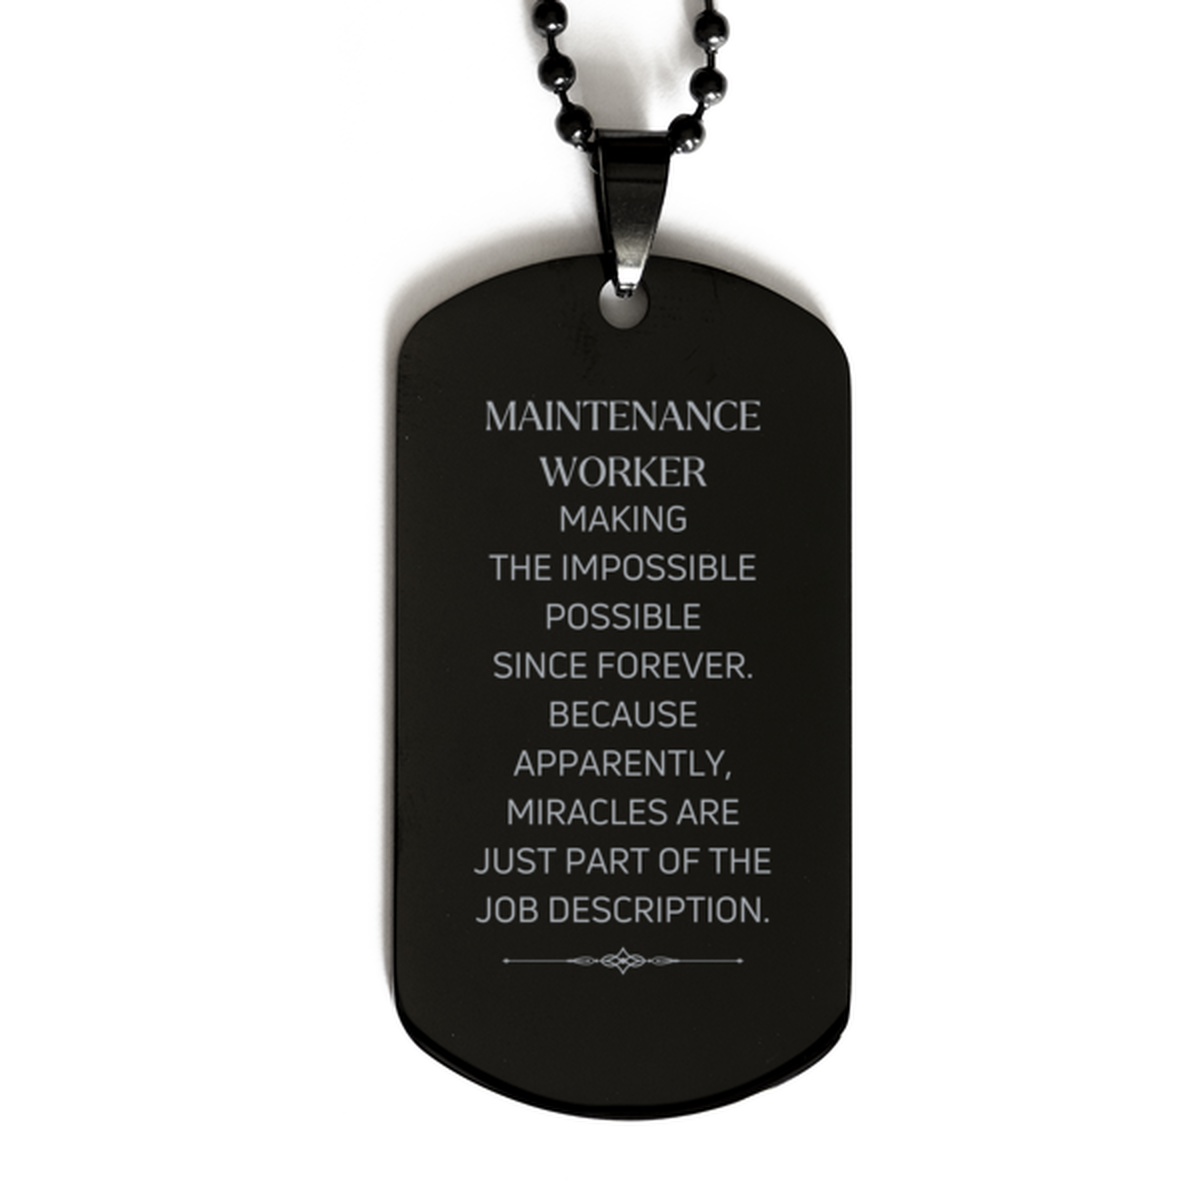 Funny Maintenance Worker Gifts, Miracles are just part of the job description, Inspirational Birthday Black Dog Tag For Maintenance Worker, Men, Women, Coworkers, Friends, Boss